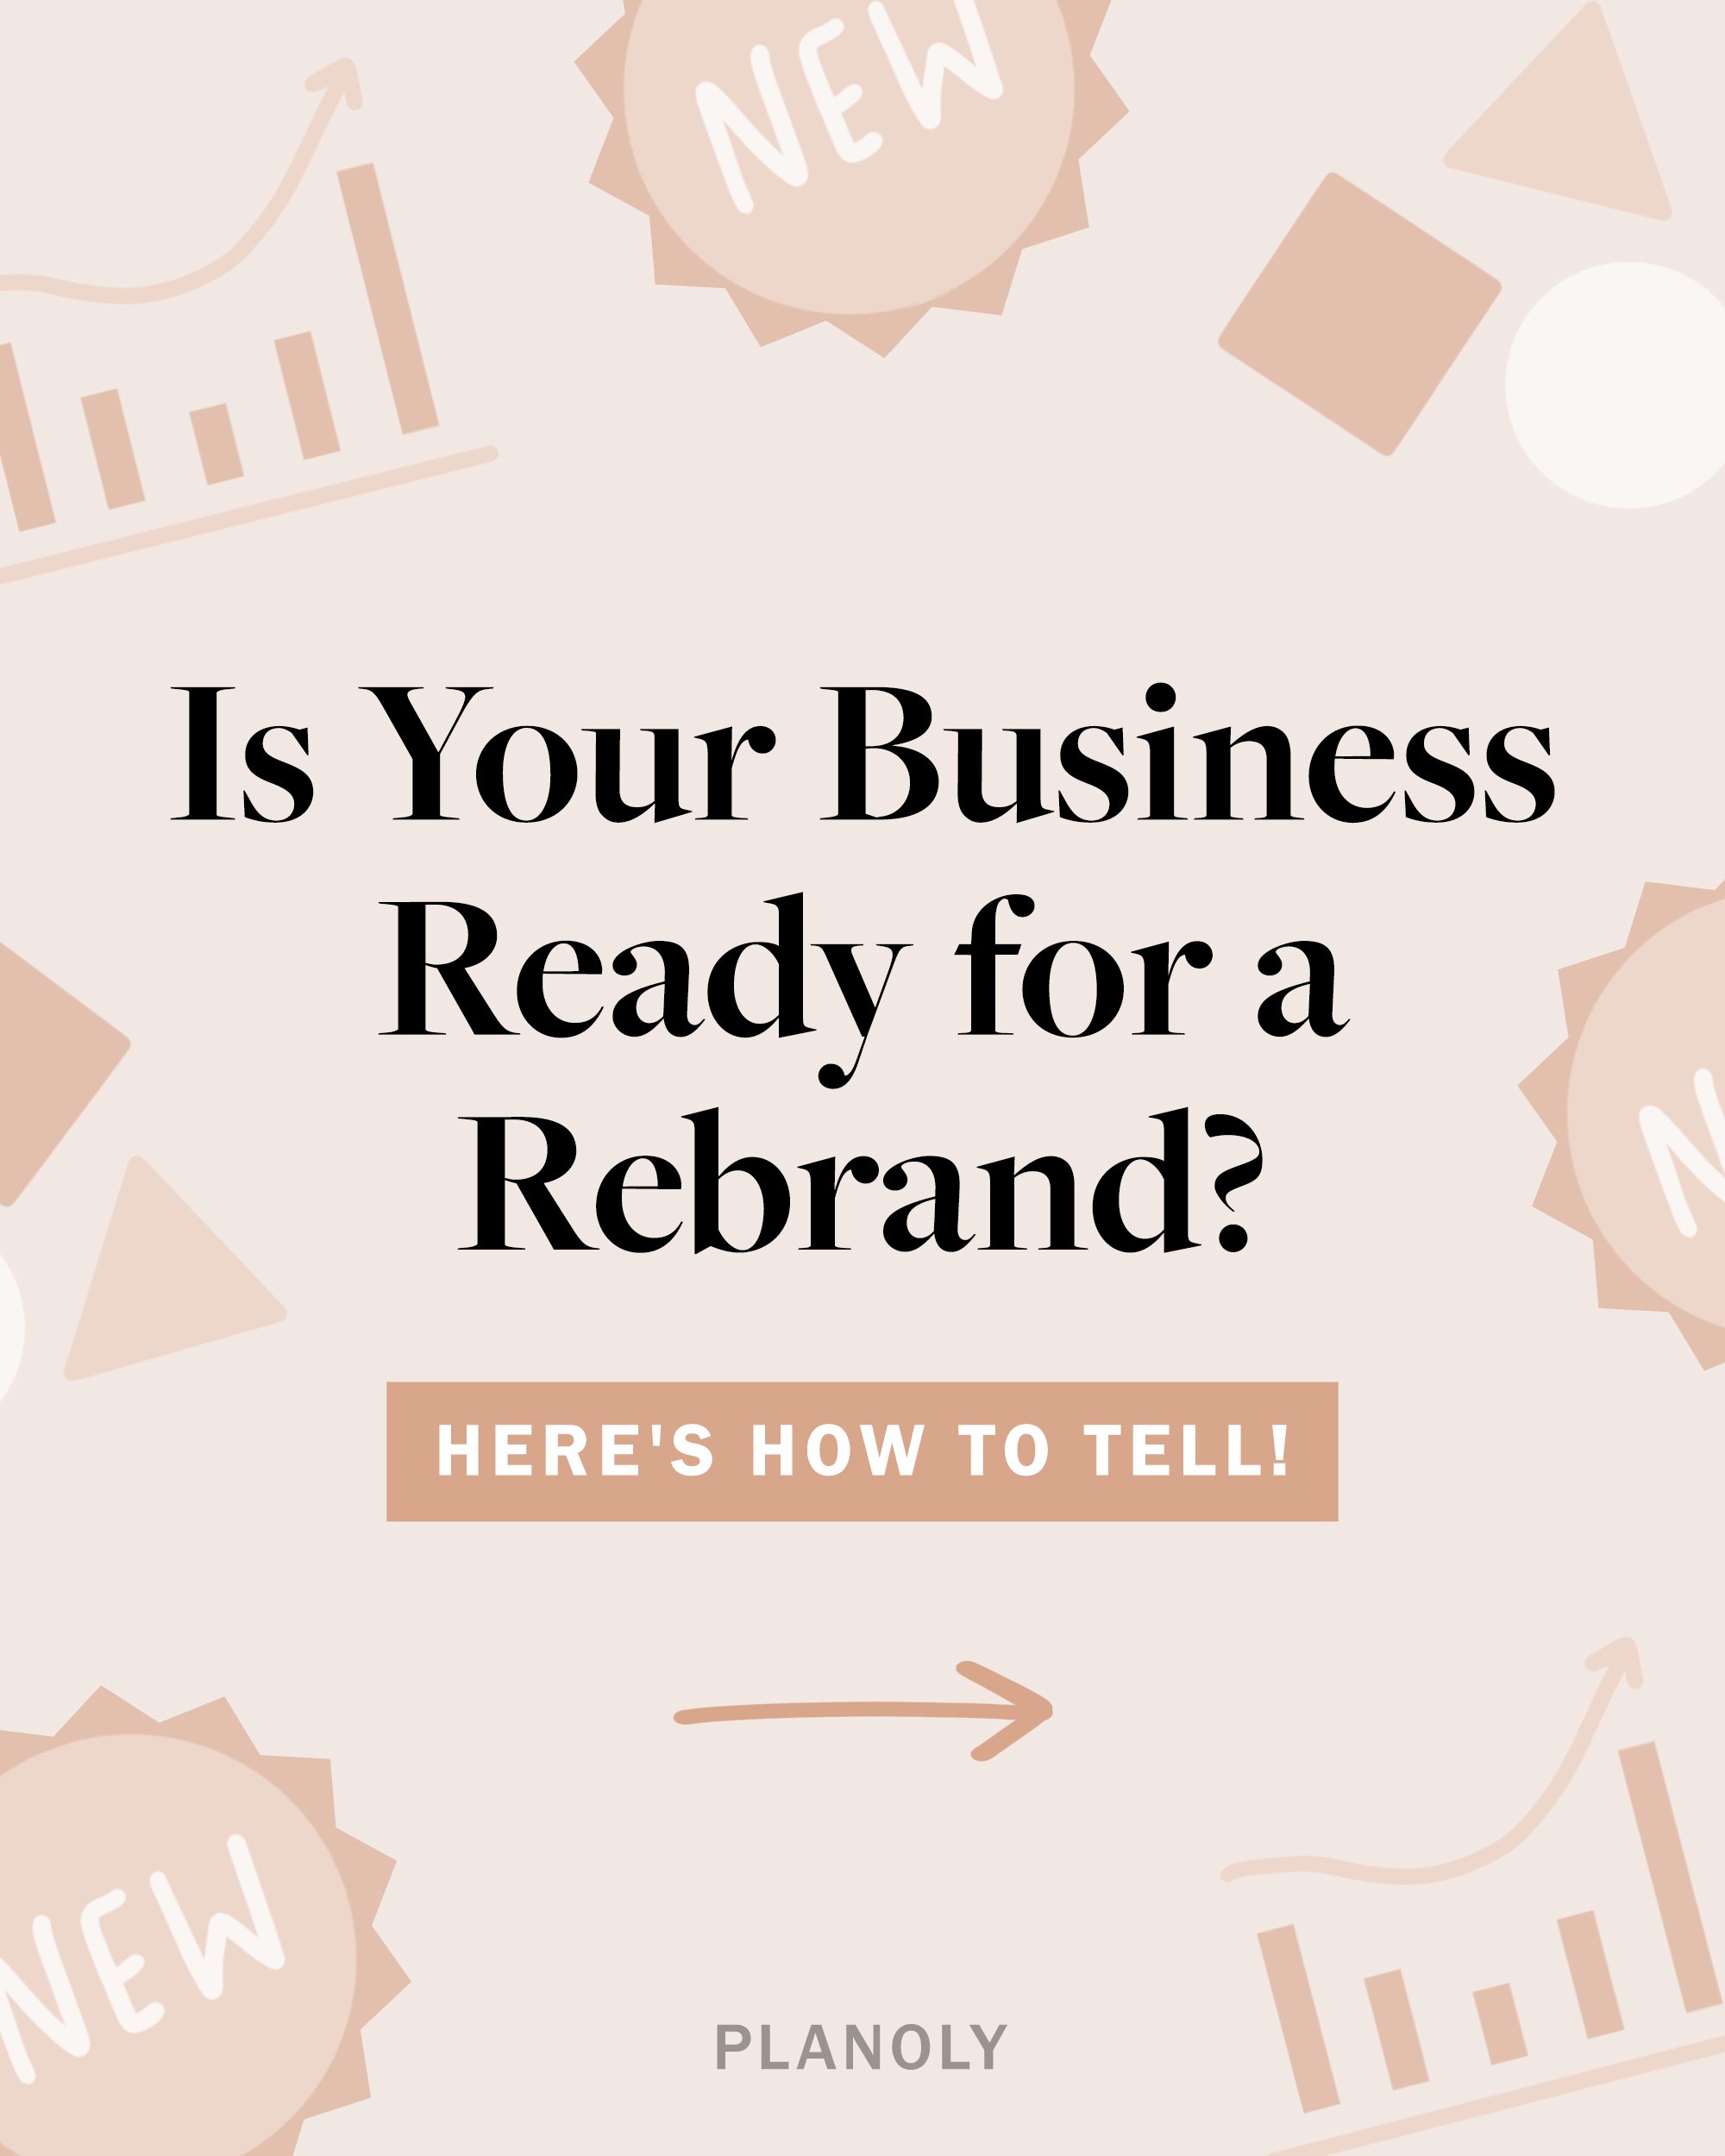 PLANOLY - IG Feed - How to Rebrand - 1.jpg